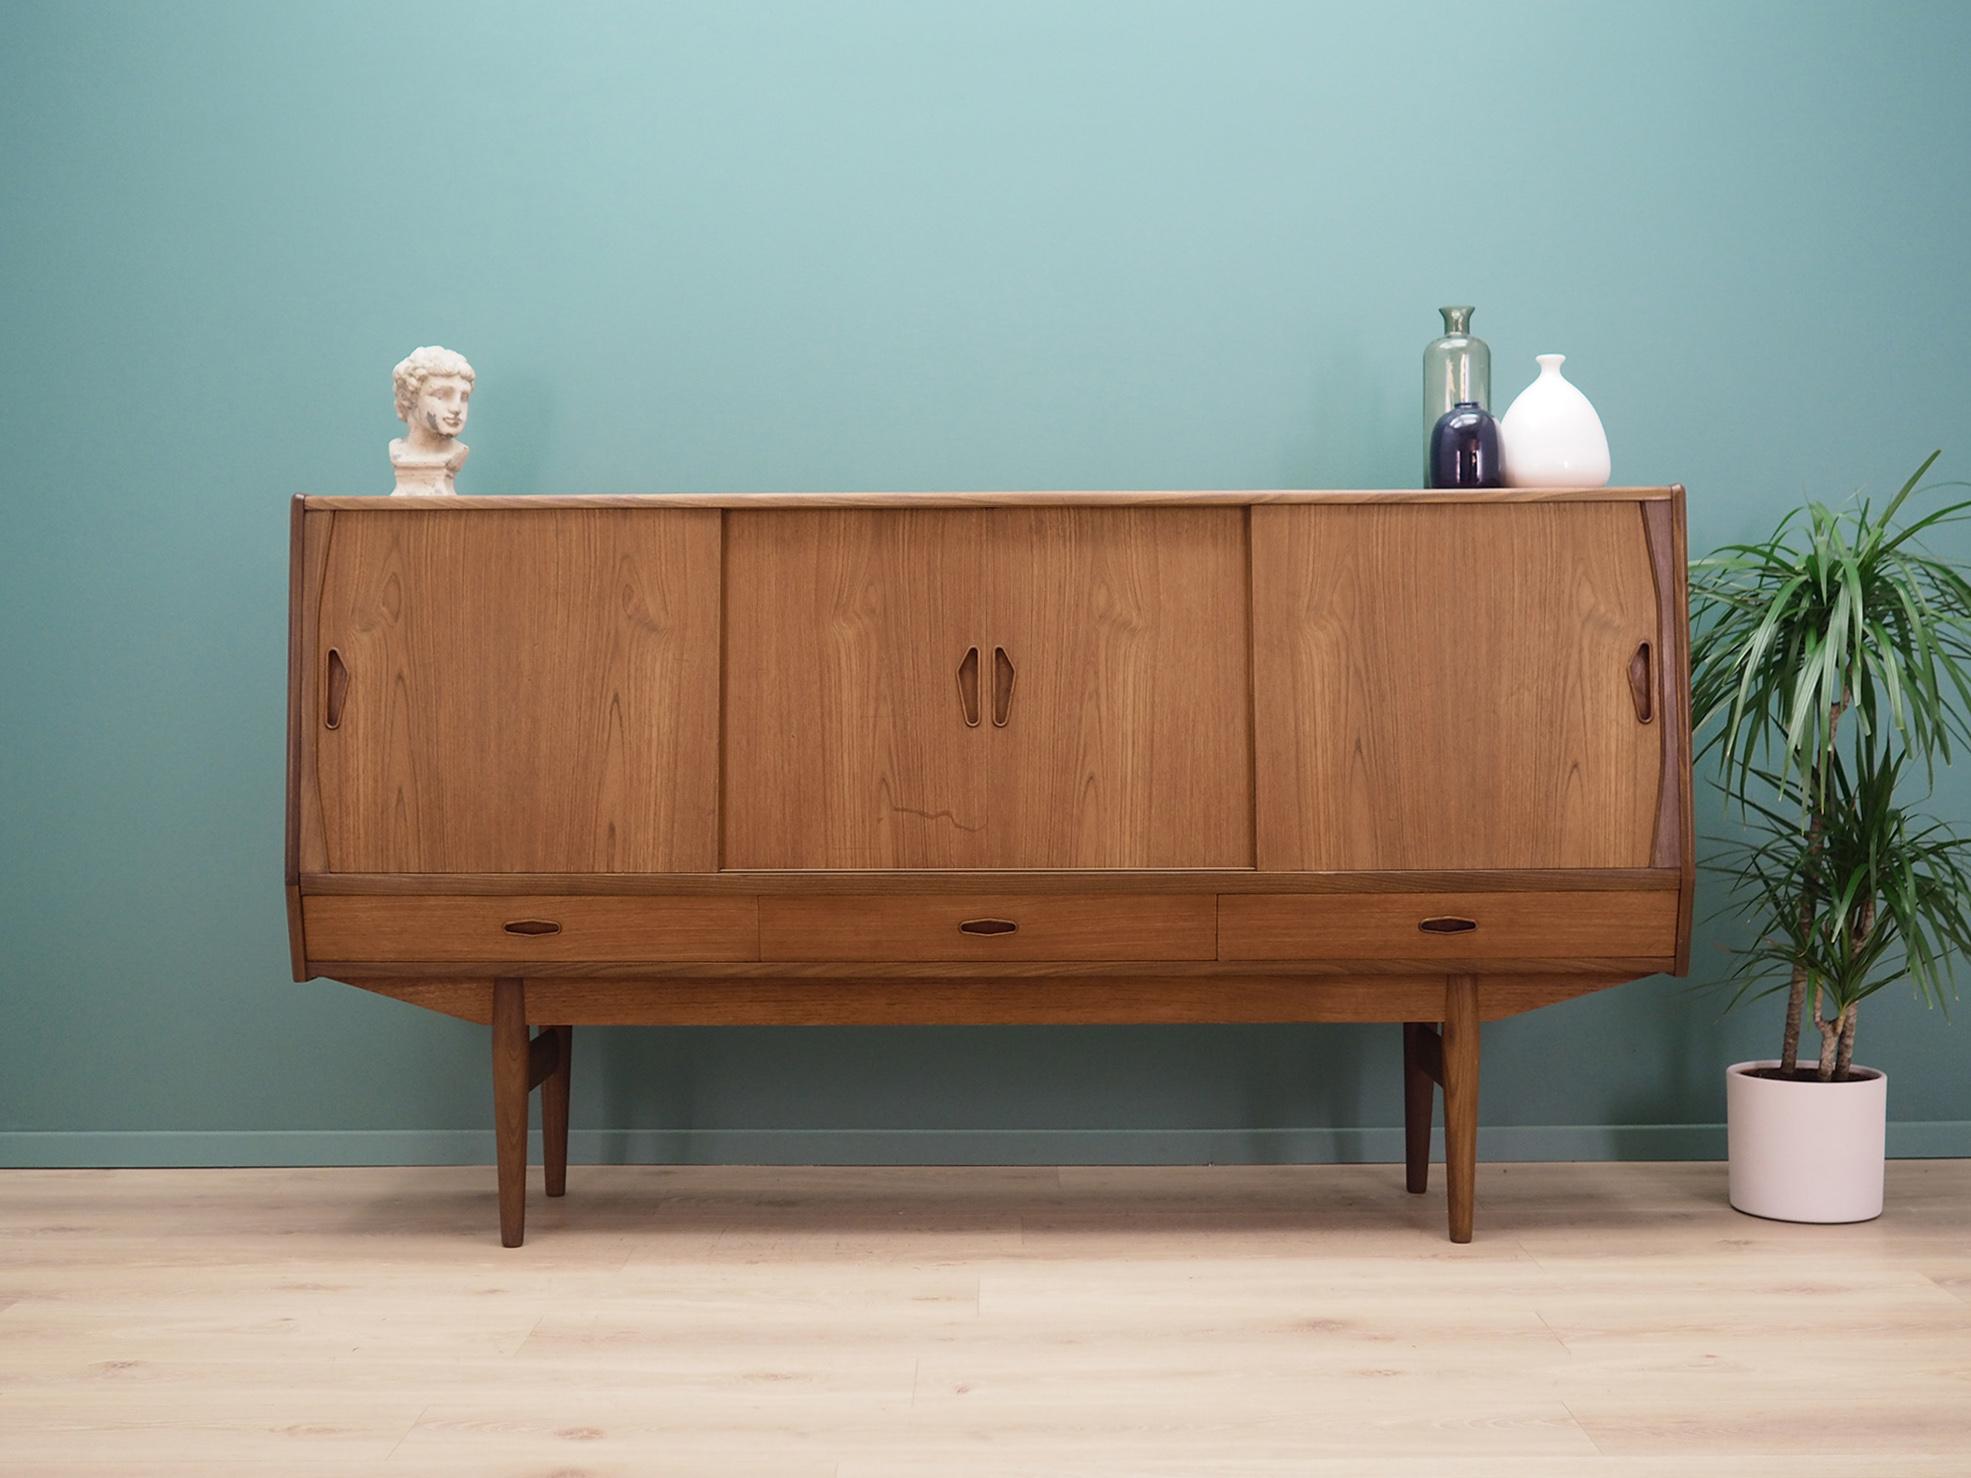 Highboard was made in the 1970s, Danish production.

The structure is covered with teak veneer. The legs and handles are made of solid teak. The surface after refreshing. Inside space has been filled with practical shelves with height adjustment.